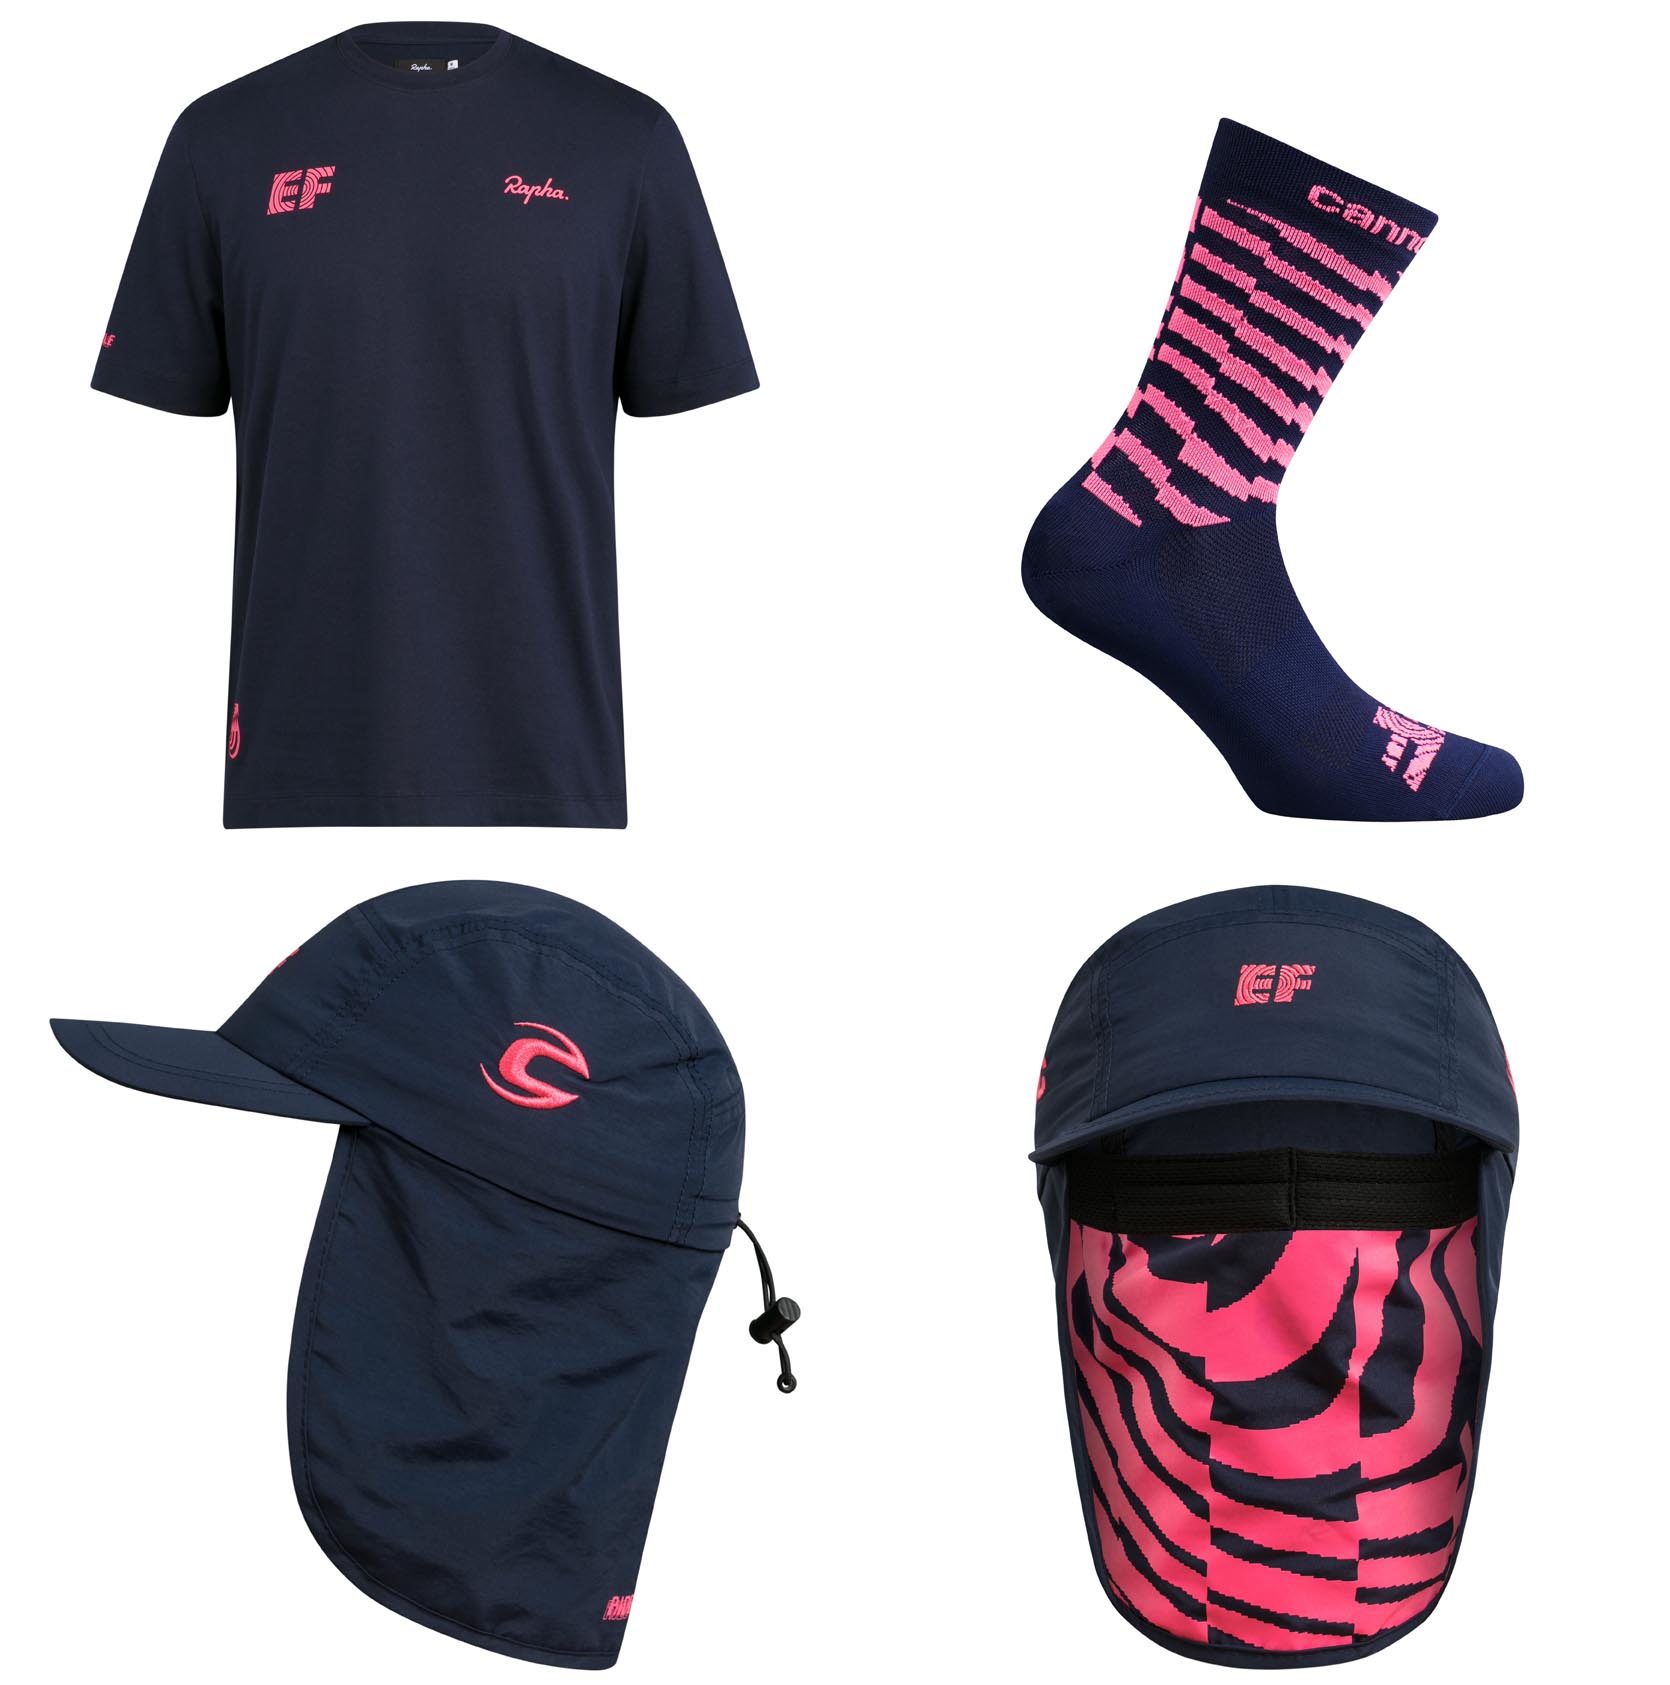 Rapha & EF Pro Cycling add even more eye catching pink & blue kits for 2020